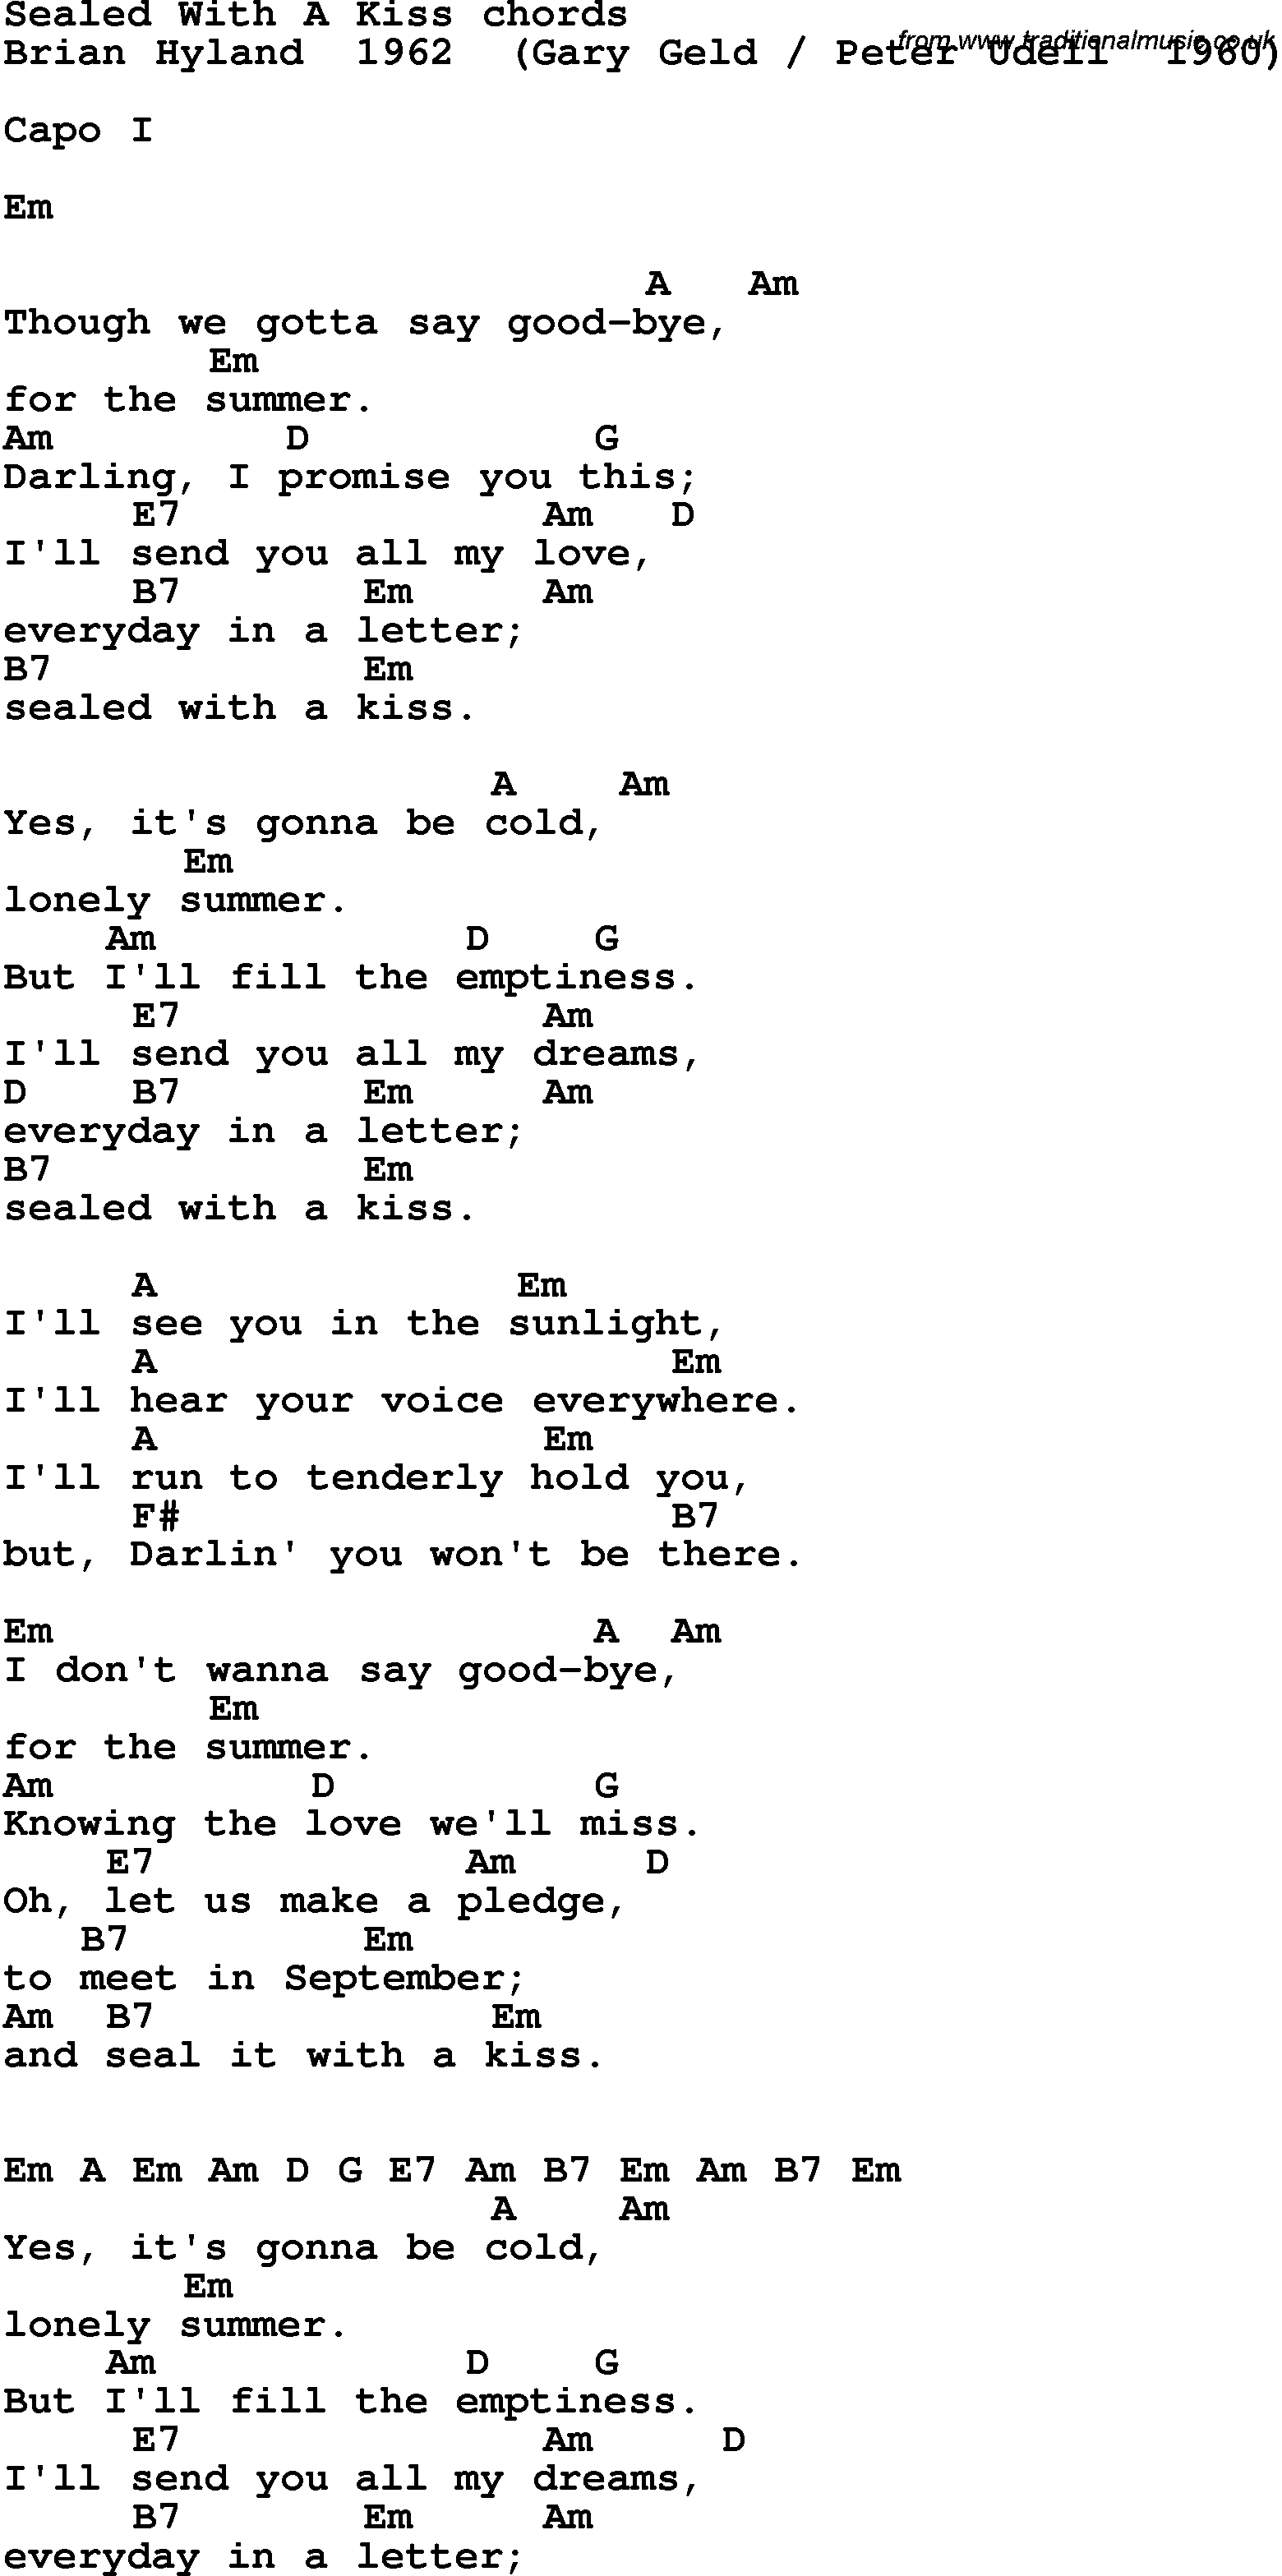 Song Lyrics with guitar chords for Sealed With A Kiss